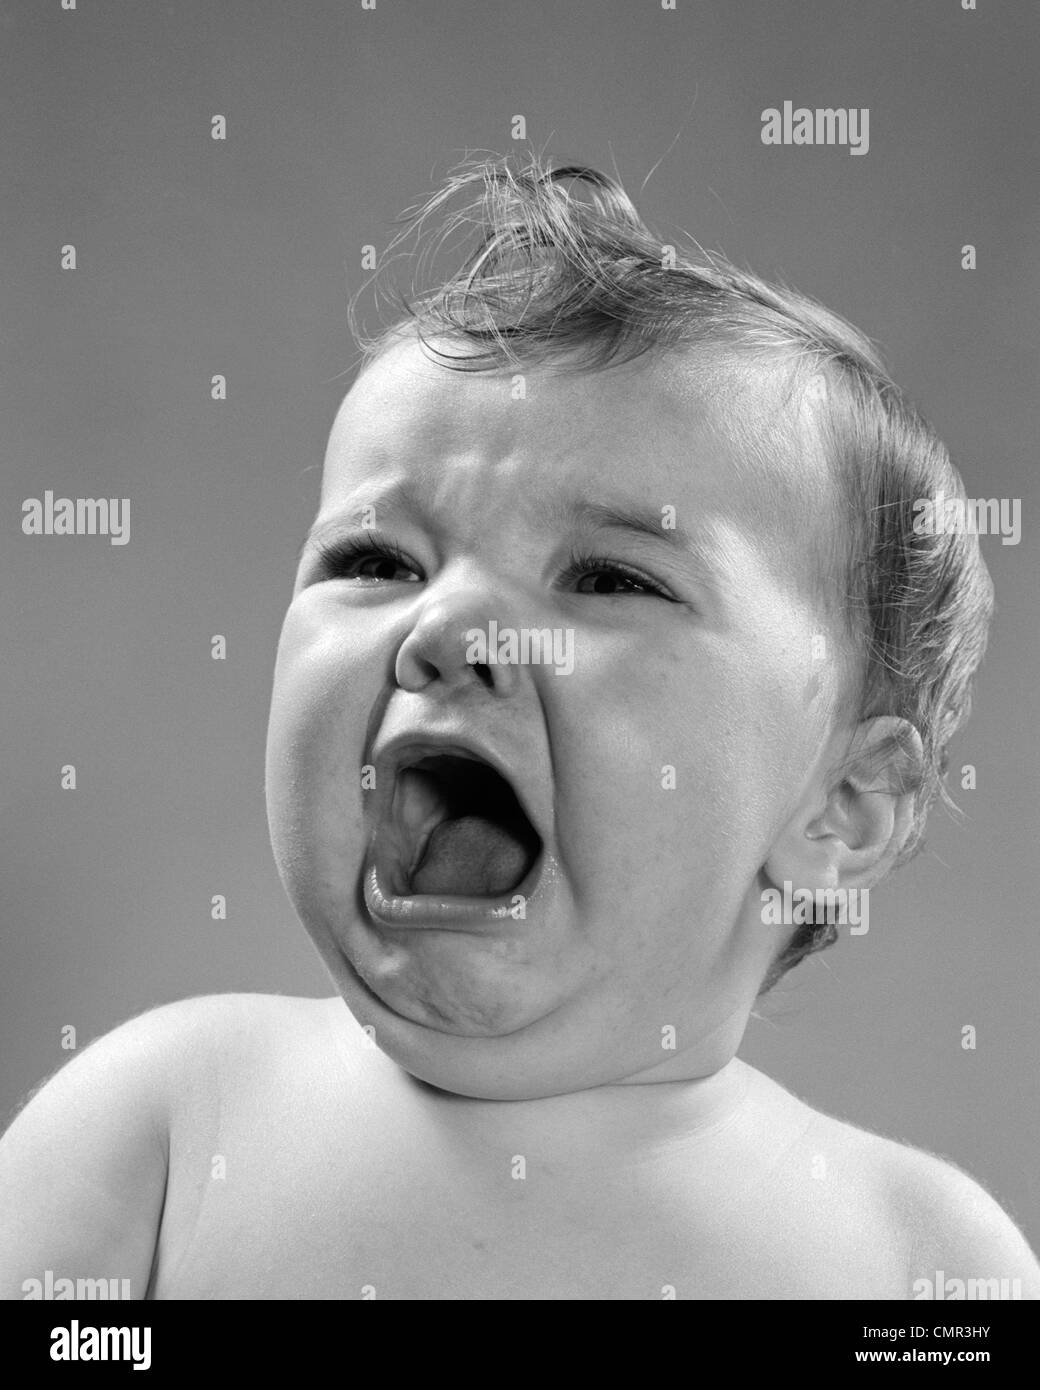 1950s CLOSE-UP OF BABY SCREAMING & CRYING WITH HEAD TURNED TO SIDE Stock Photo